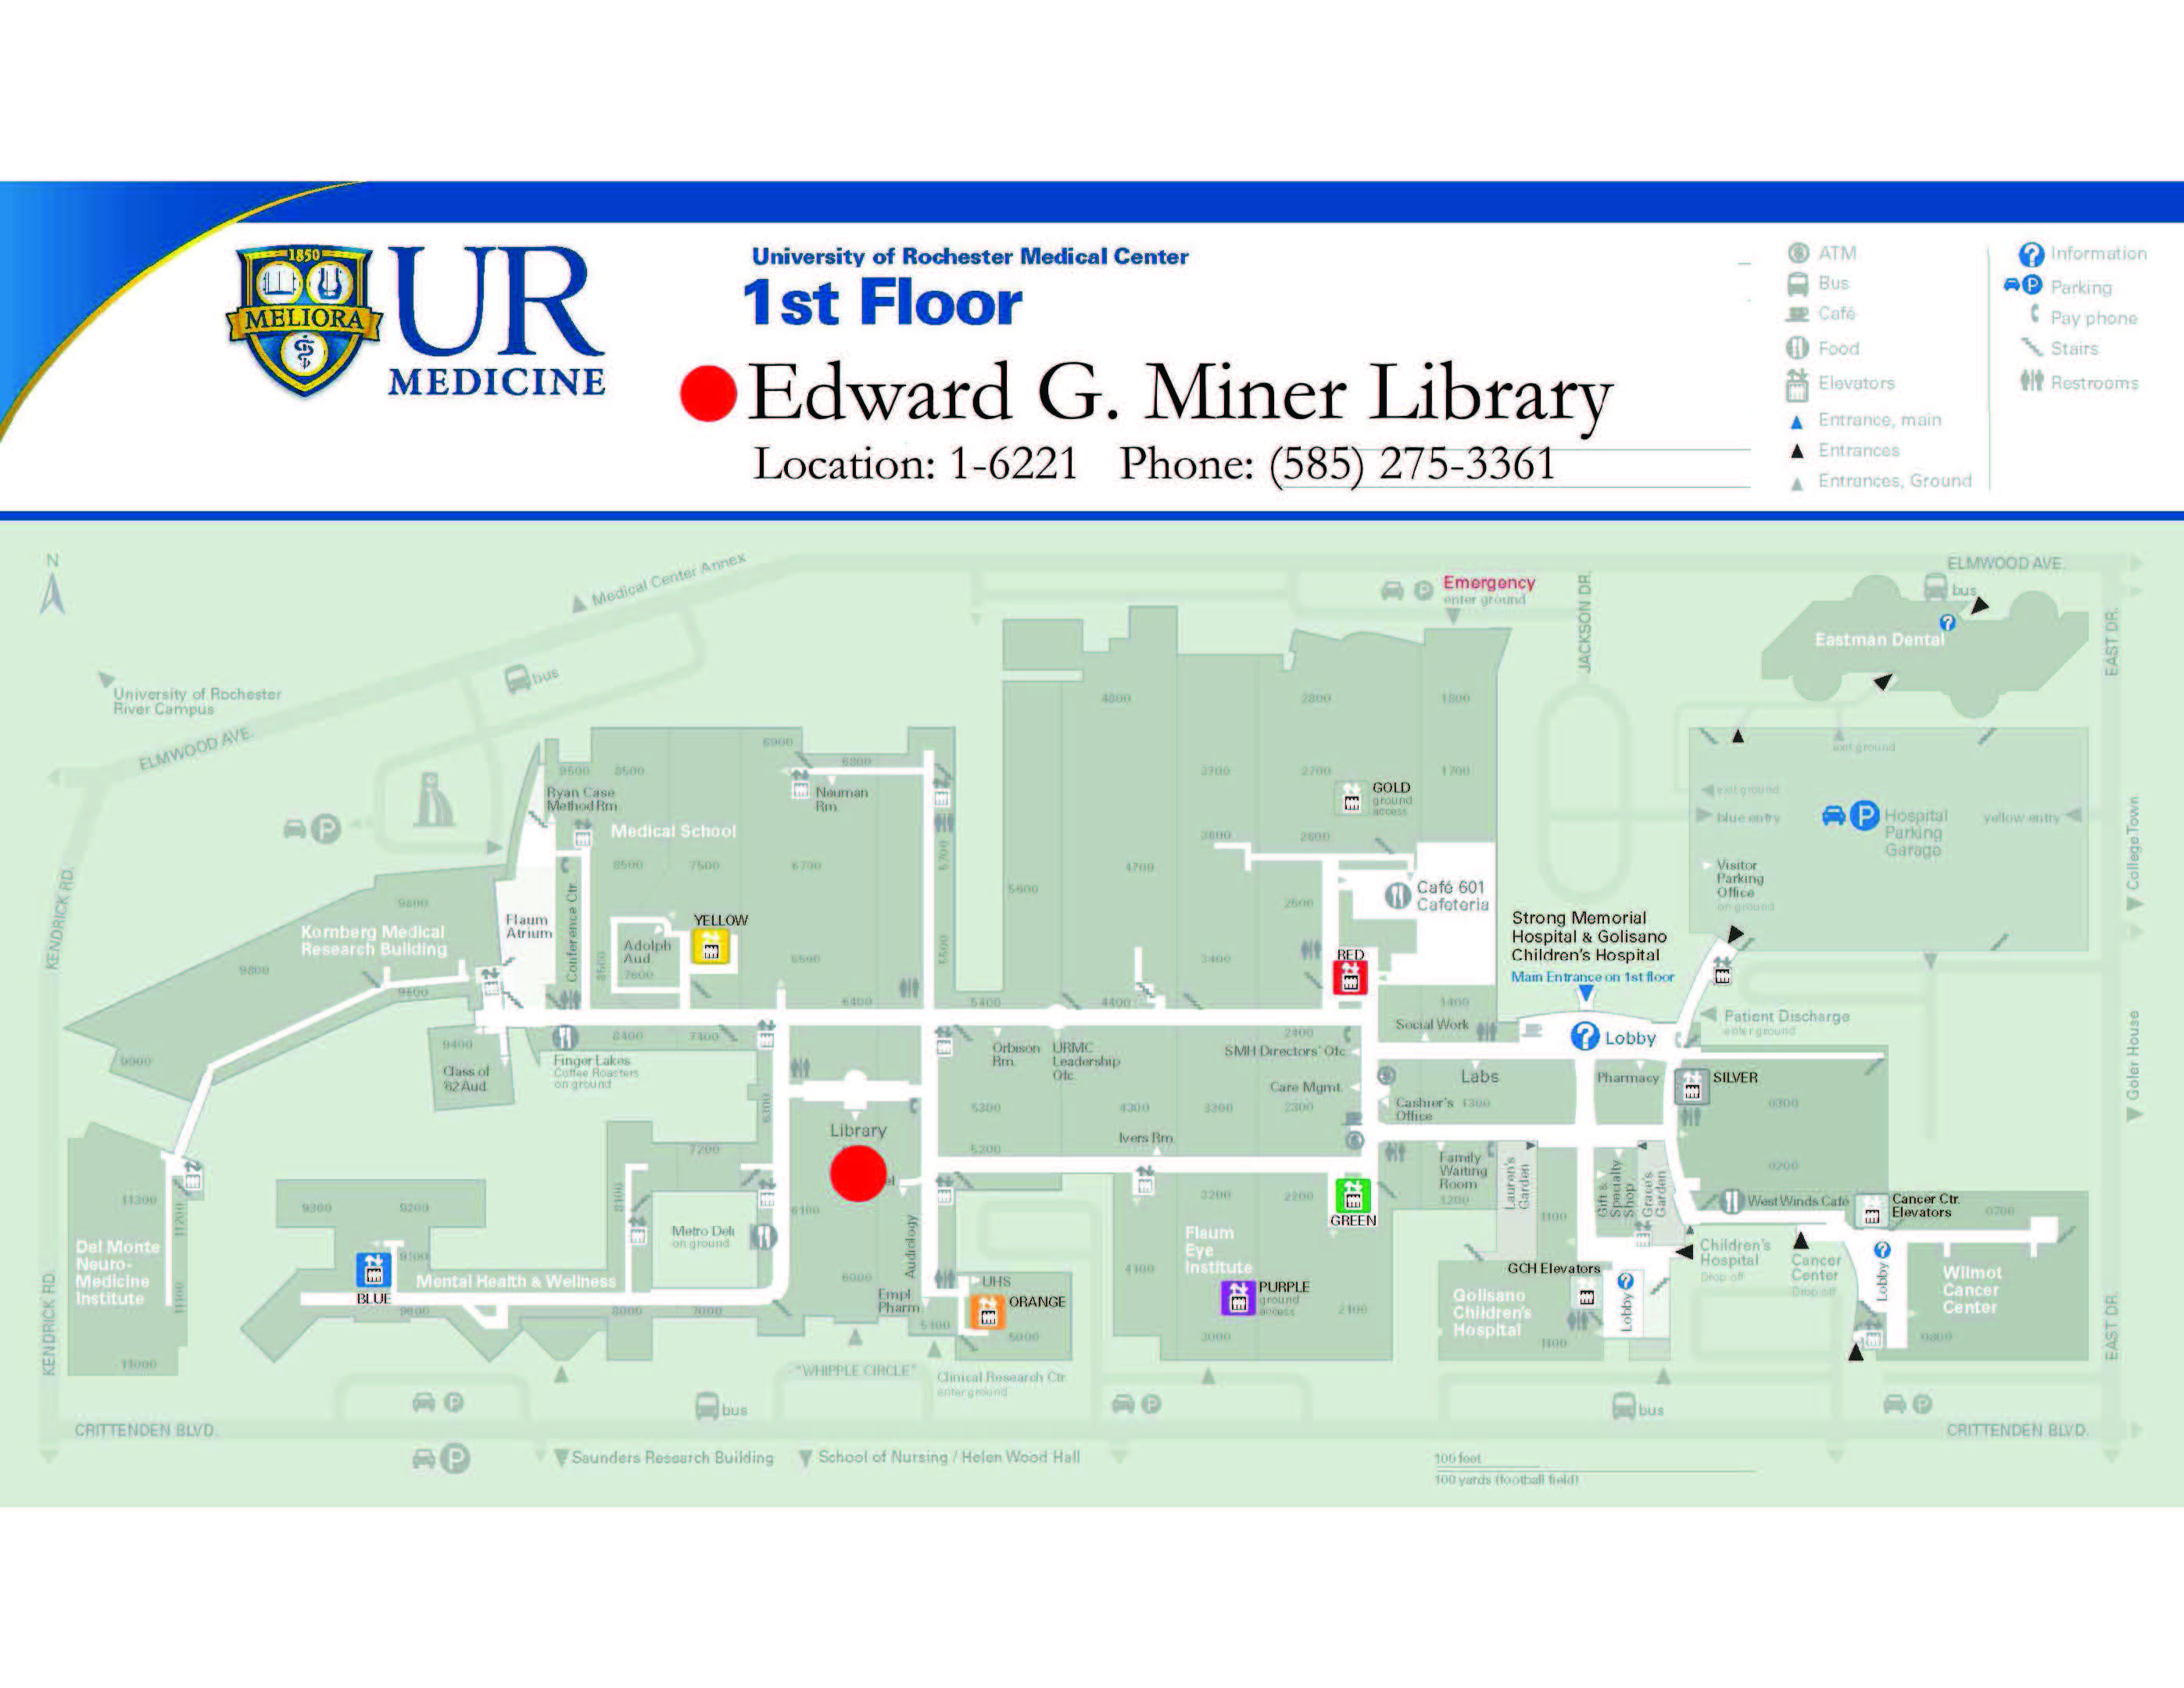 About the Miner Library